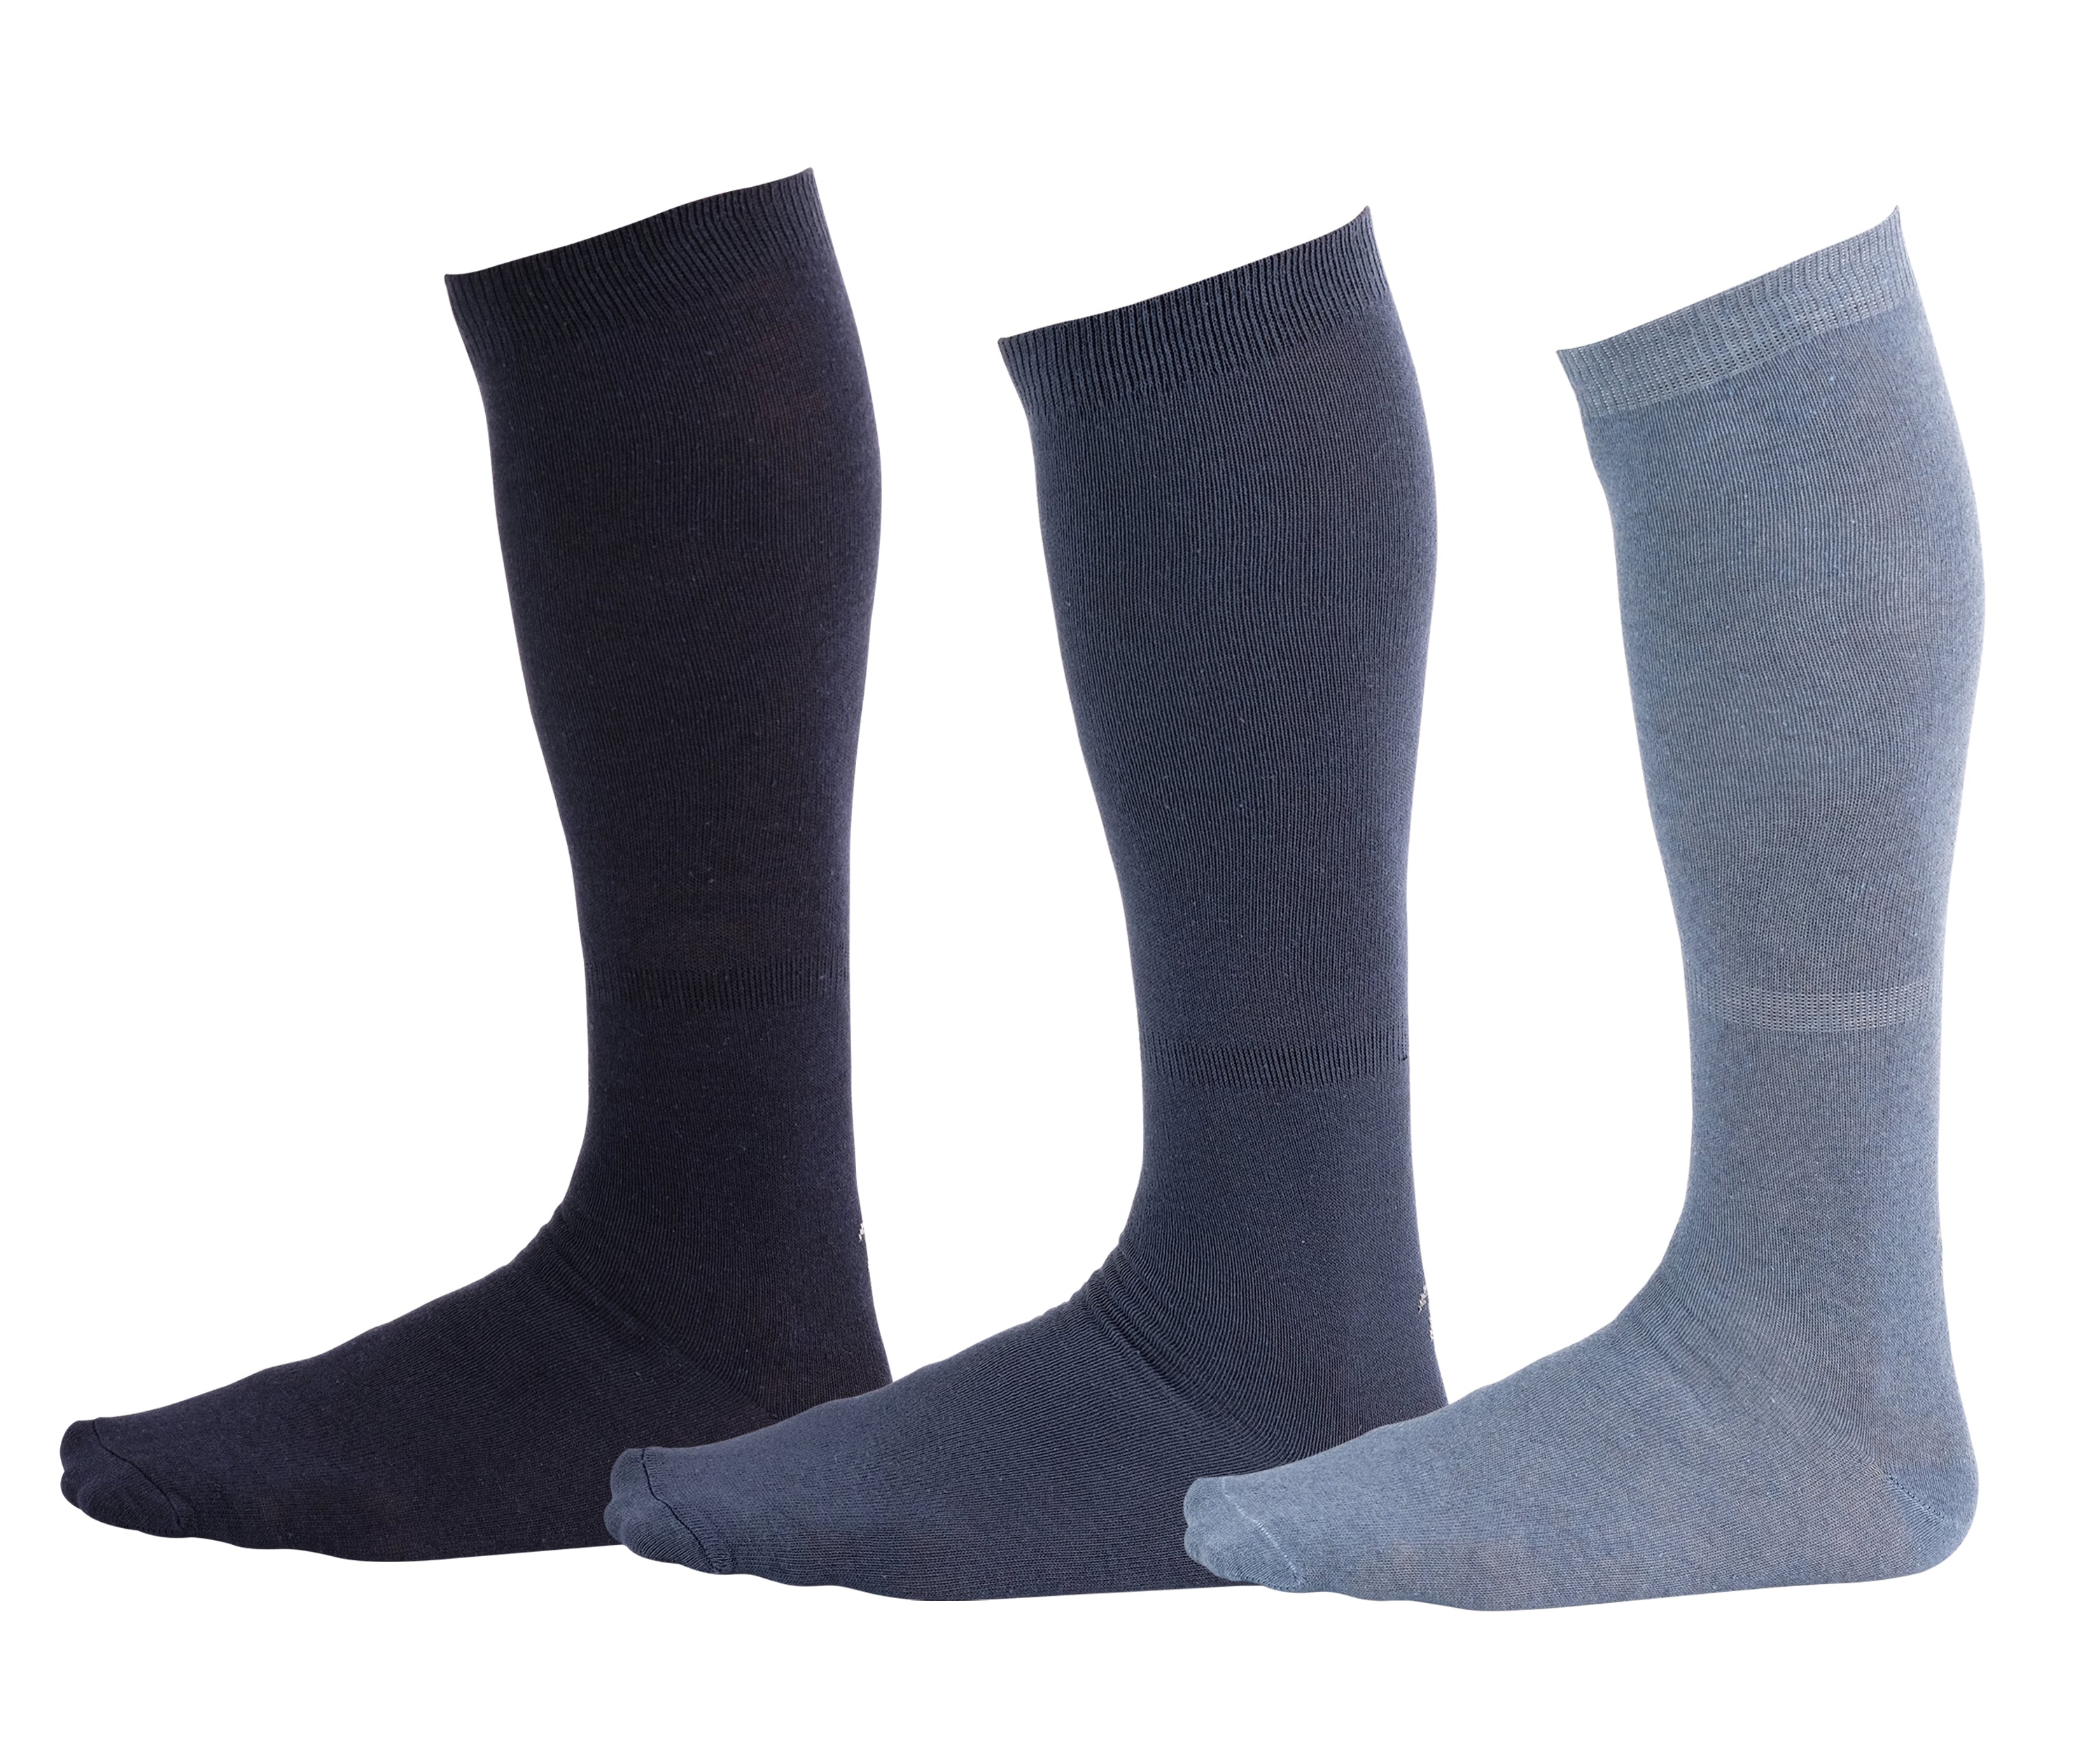 solid black over the calf dress socks, solid grey over the calf dress socks, solid light grey over the calf dress socks